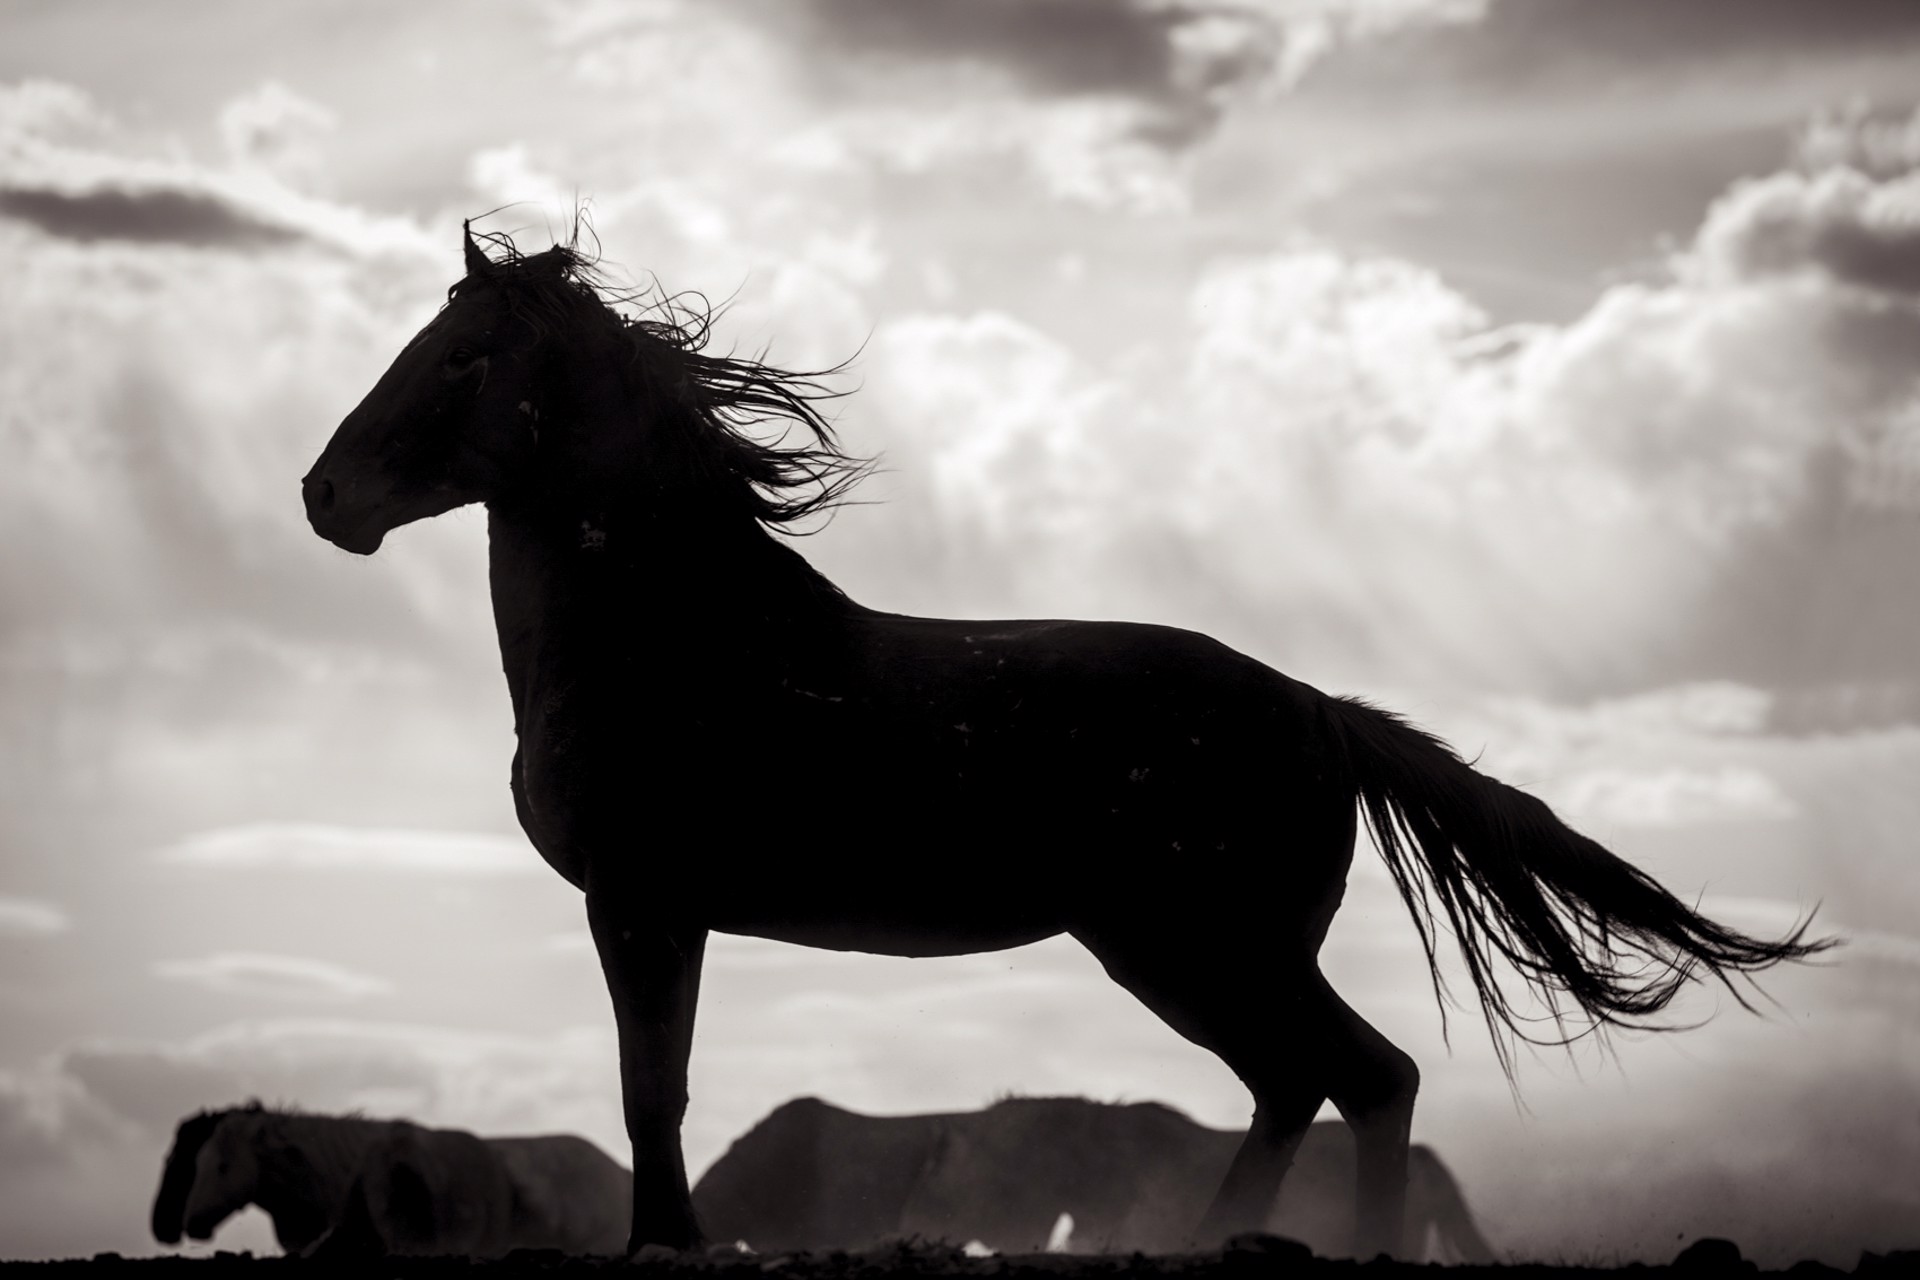 Black And White Photograph Featuring Dark Horse Standing Silhouette With Clouds And Other Horses In Background